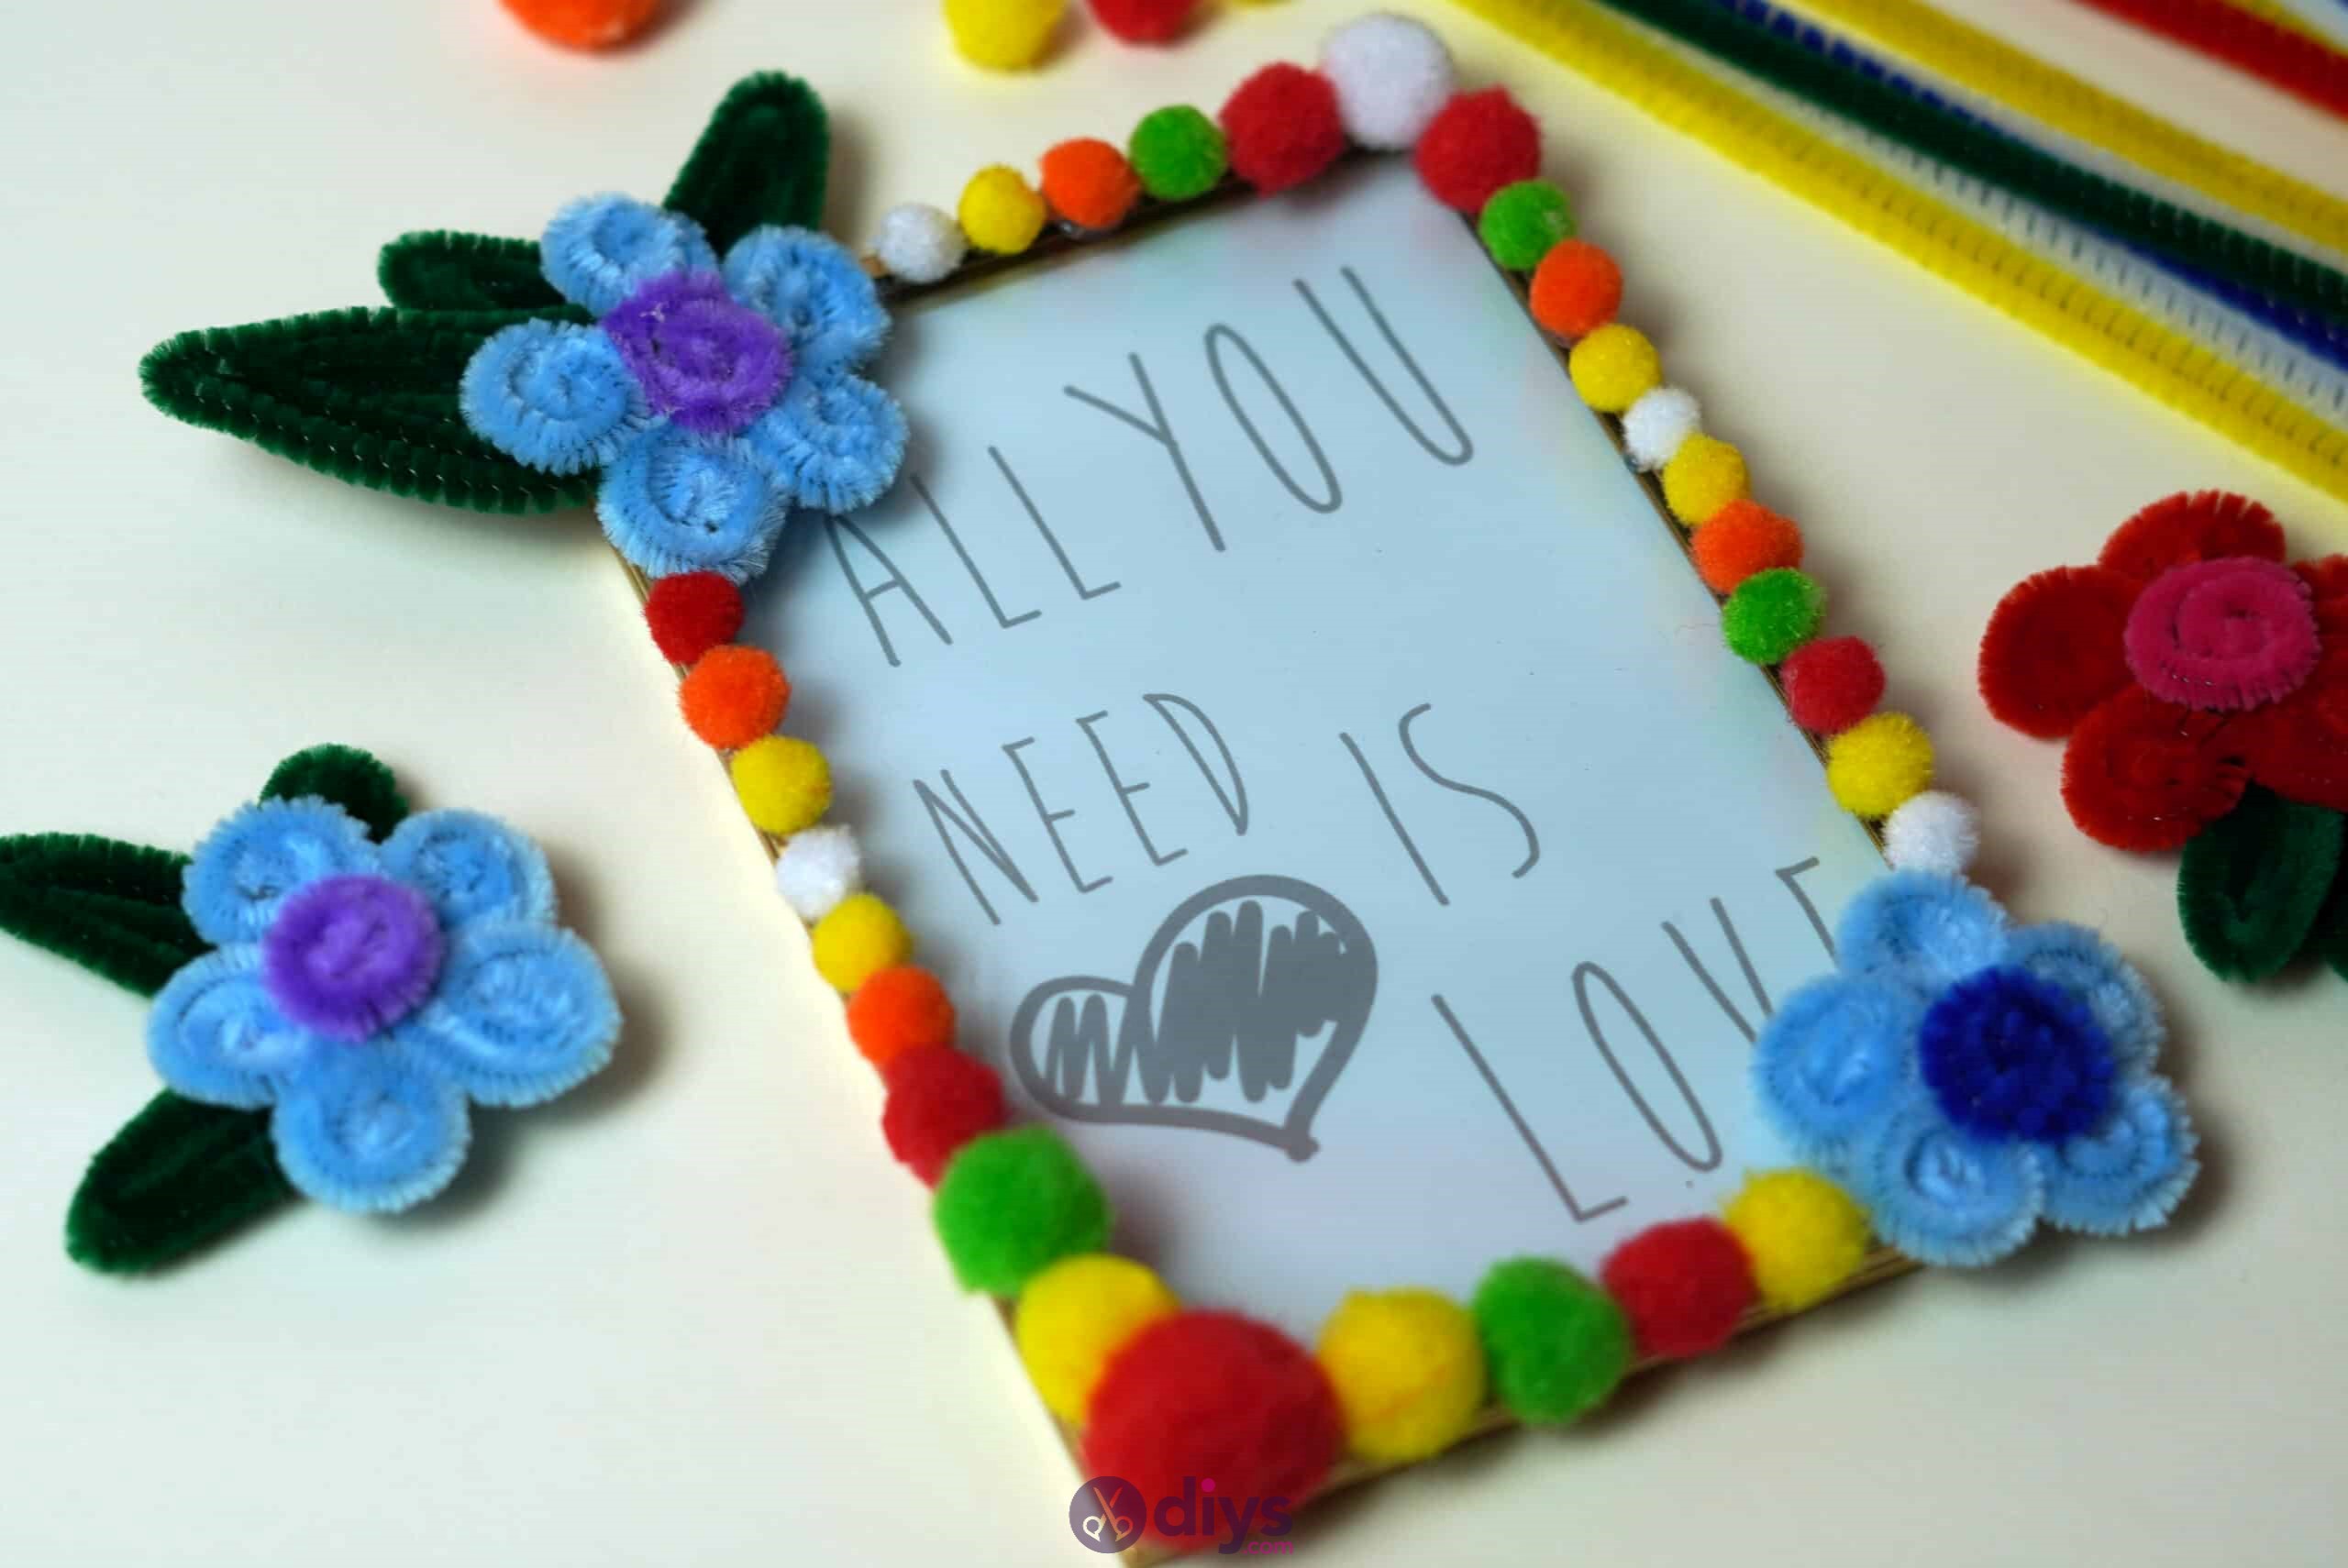 Pipe cleaner photo frame decoration colorful